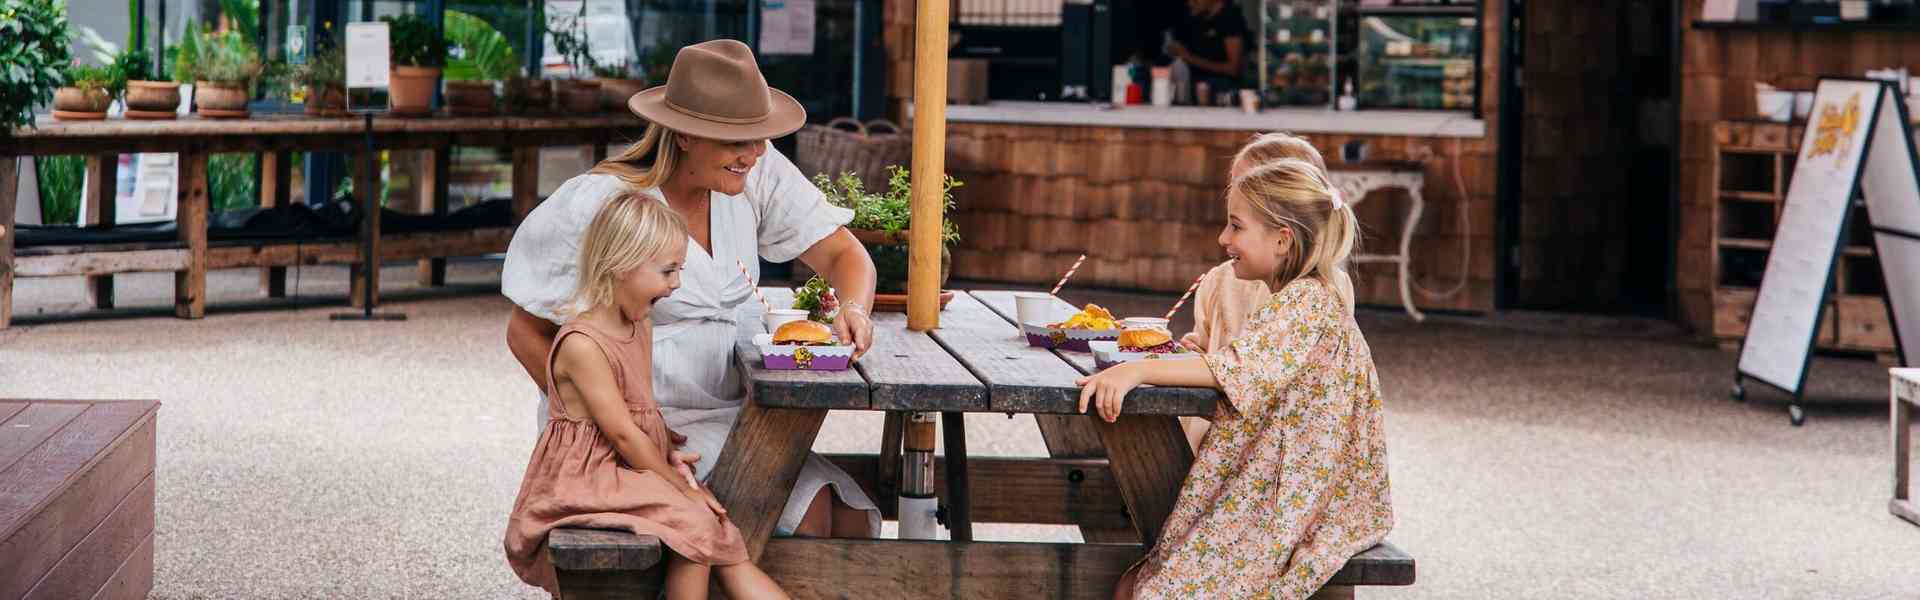 Where to Eat With Kids on the Gold Coast